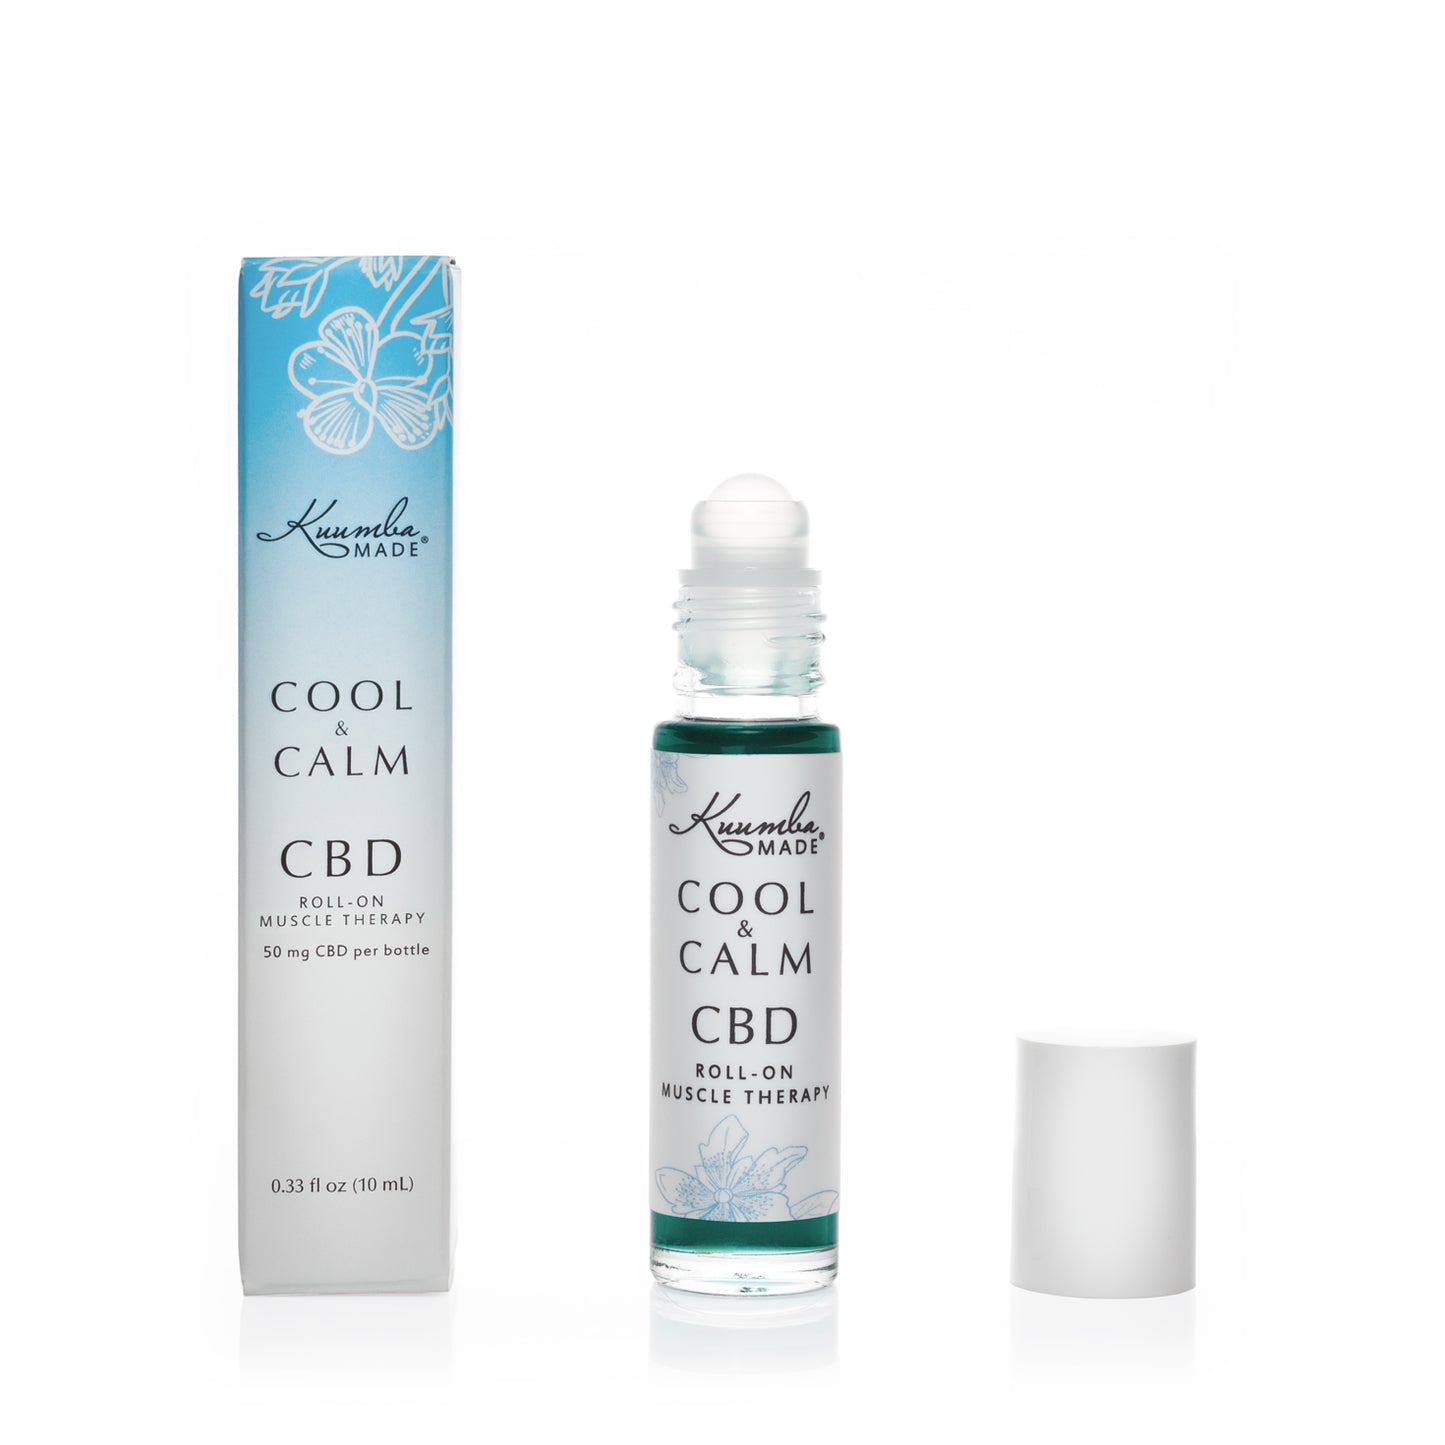 COOL & CALM- Natural CBD 10ml Roll-On from Kuumba Made